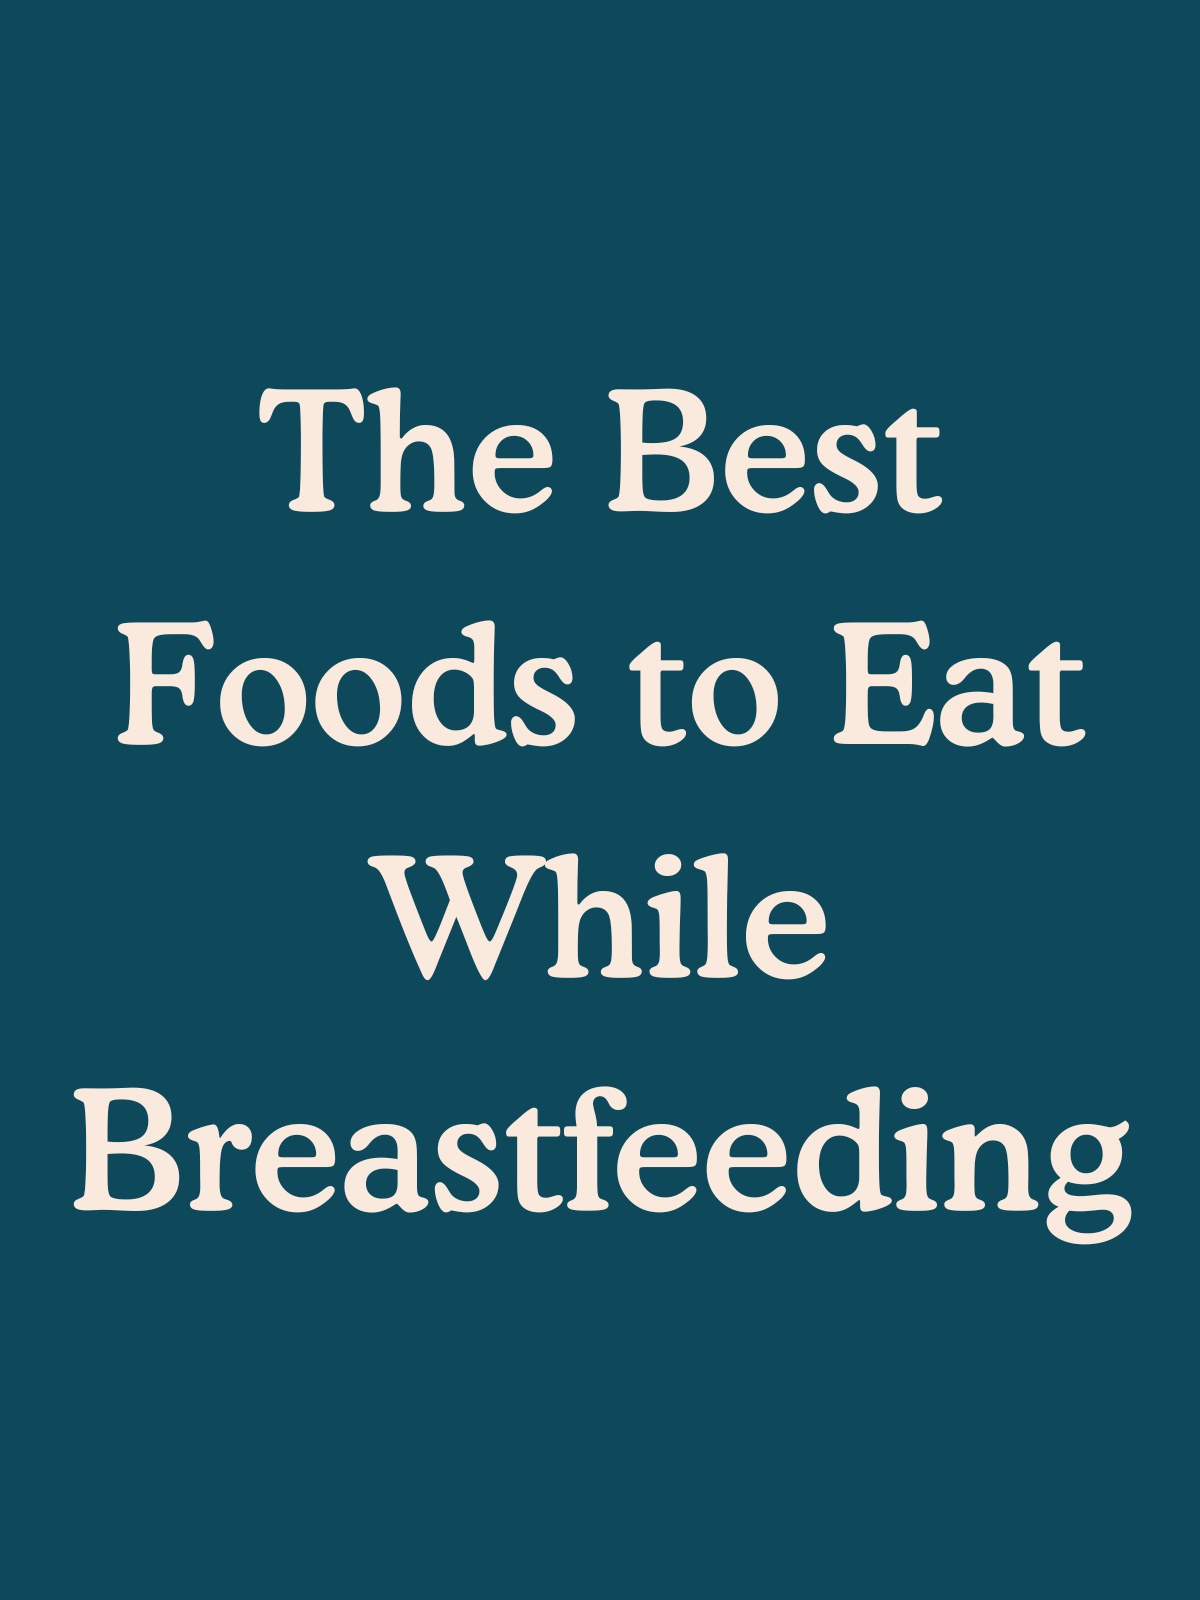 The Best Foods to Eat While Breastfeeding